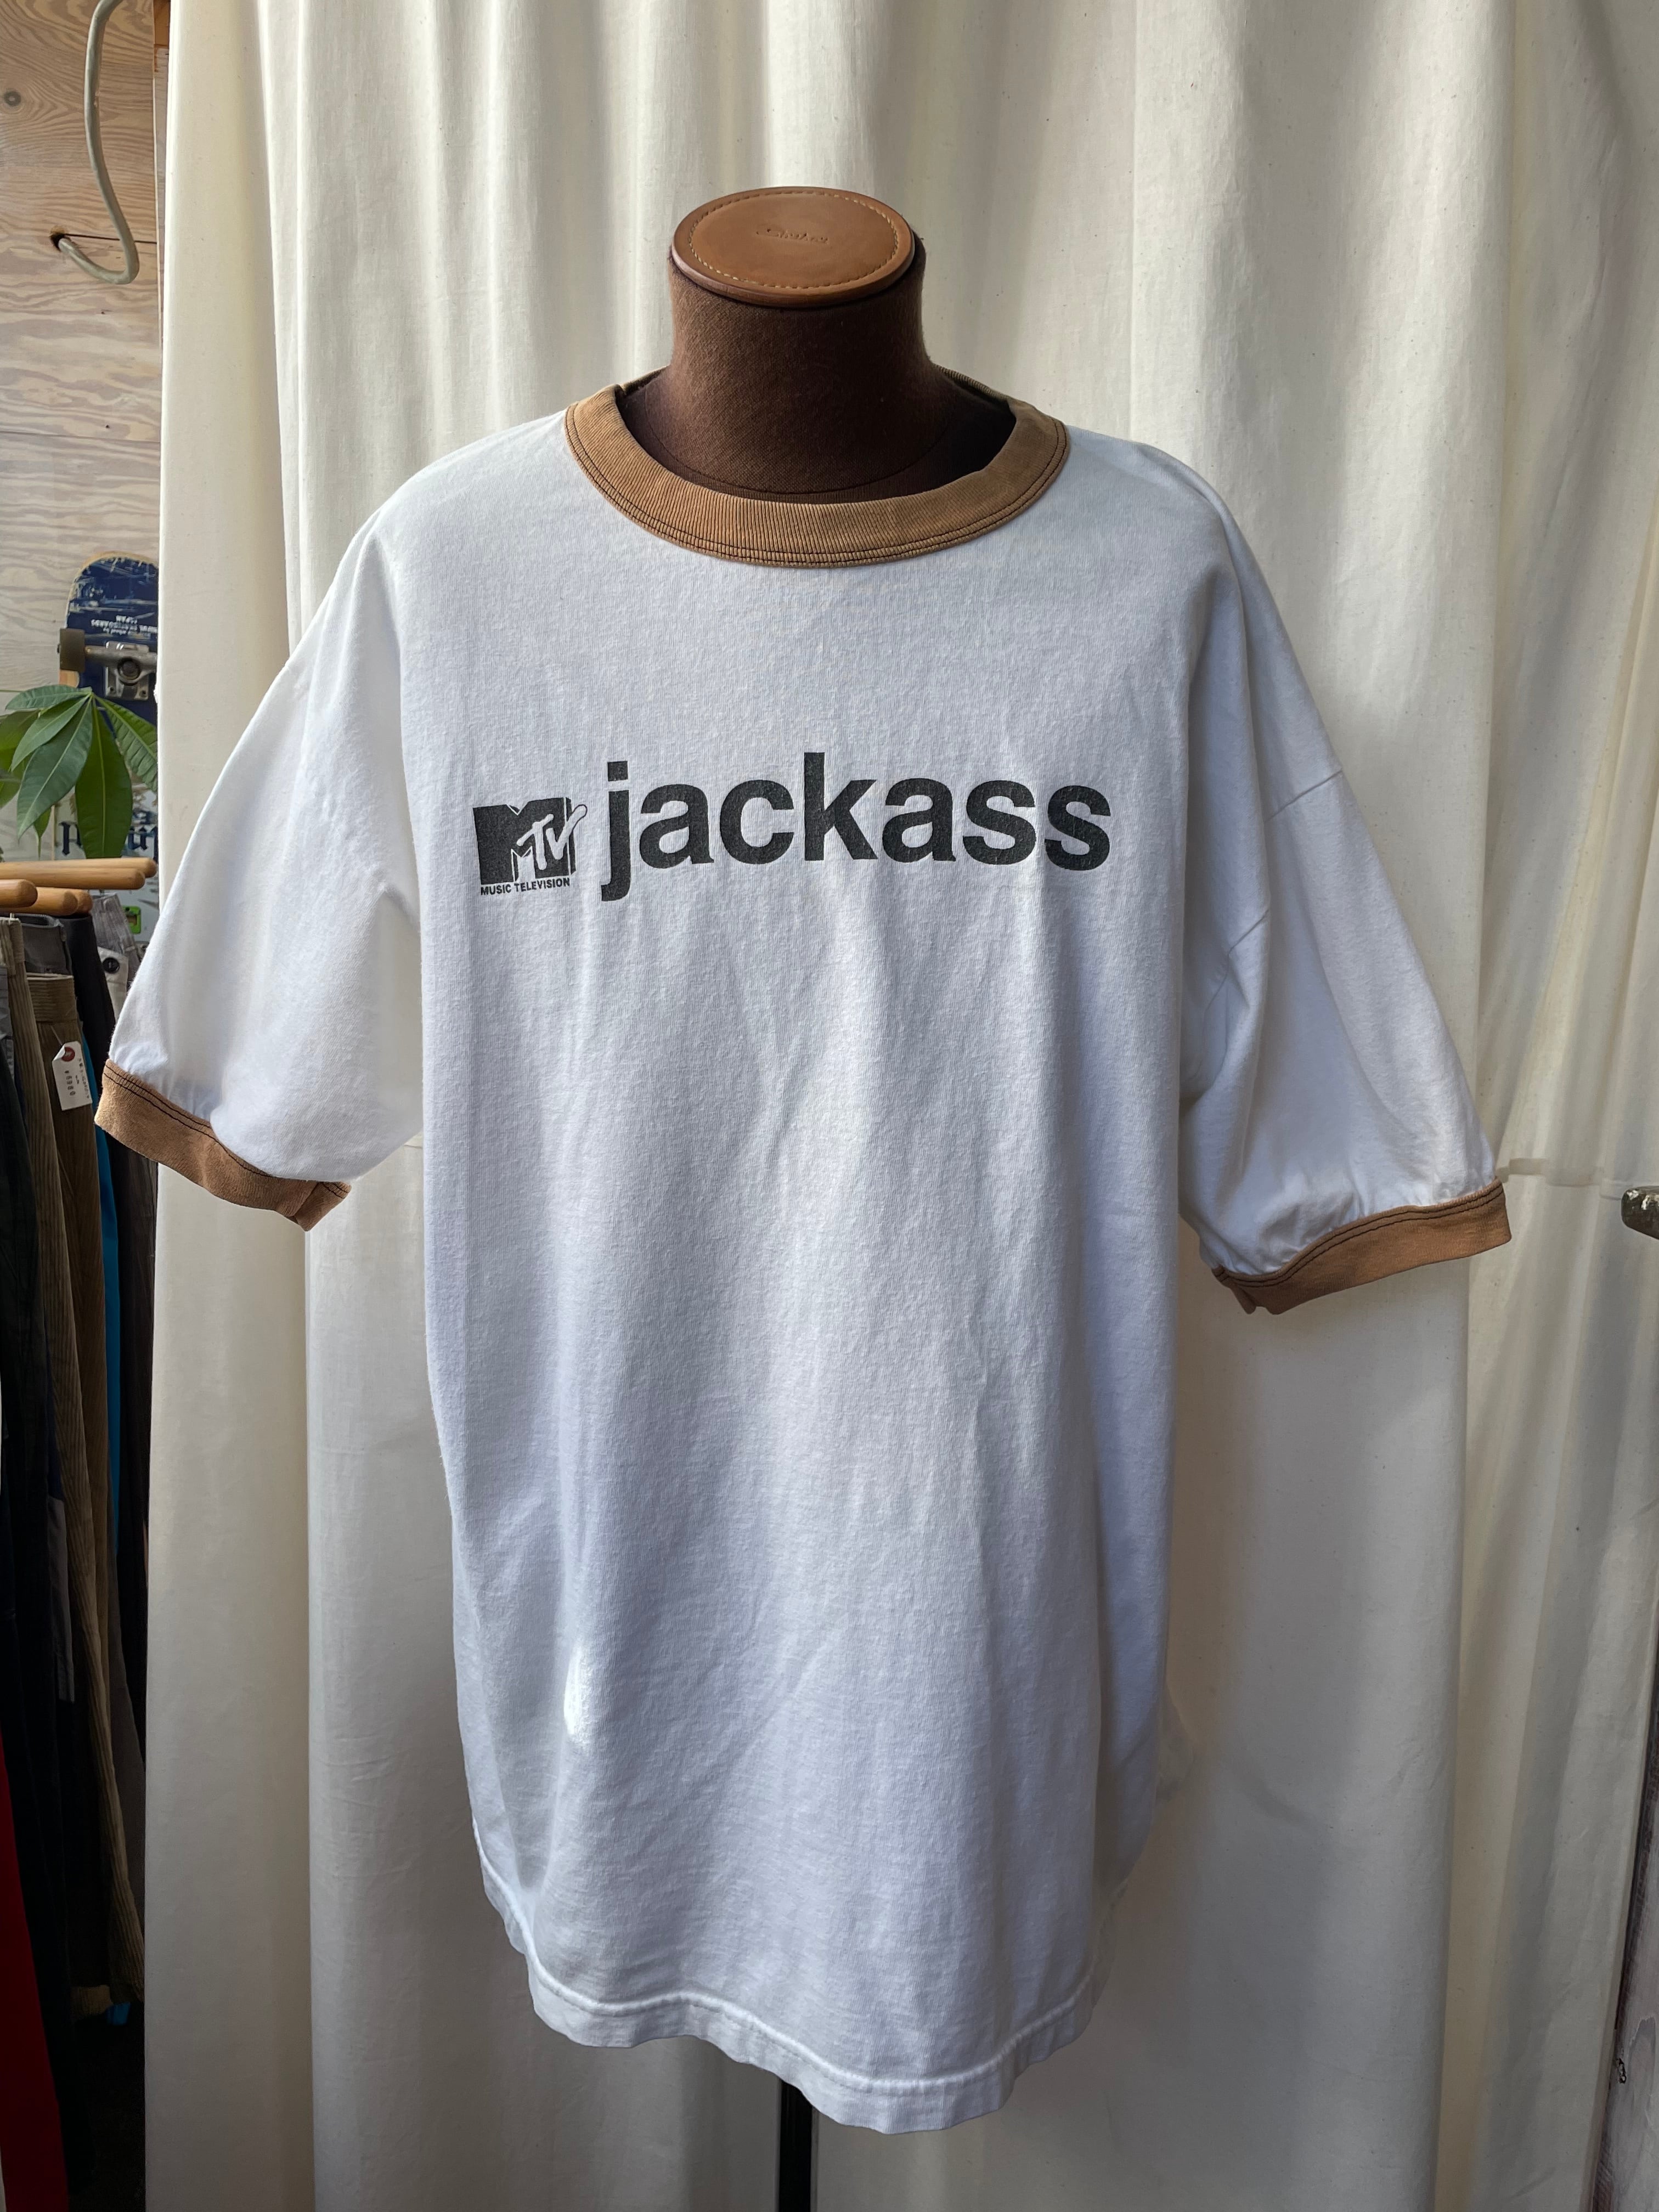 00's MTV jackass プリントTシャツ　ジャッカス　リンガーT | used clothing SHYBOY powered by BASE